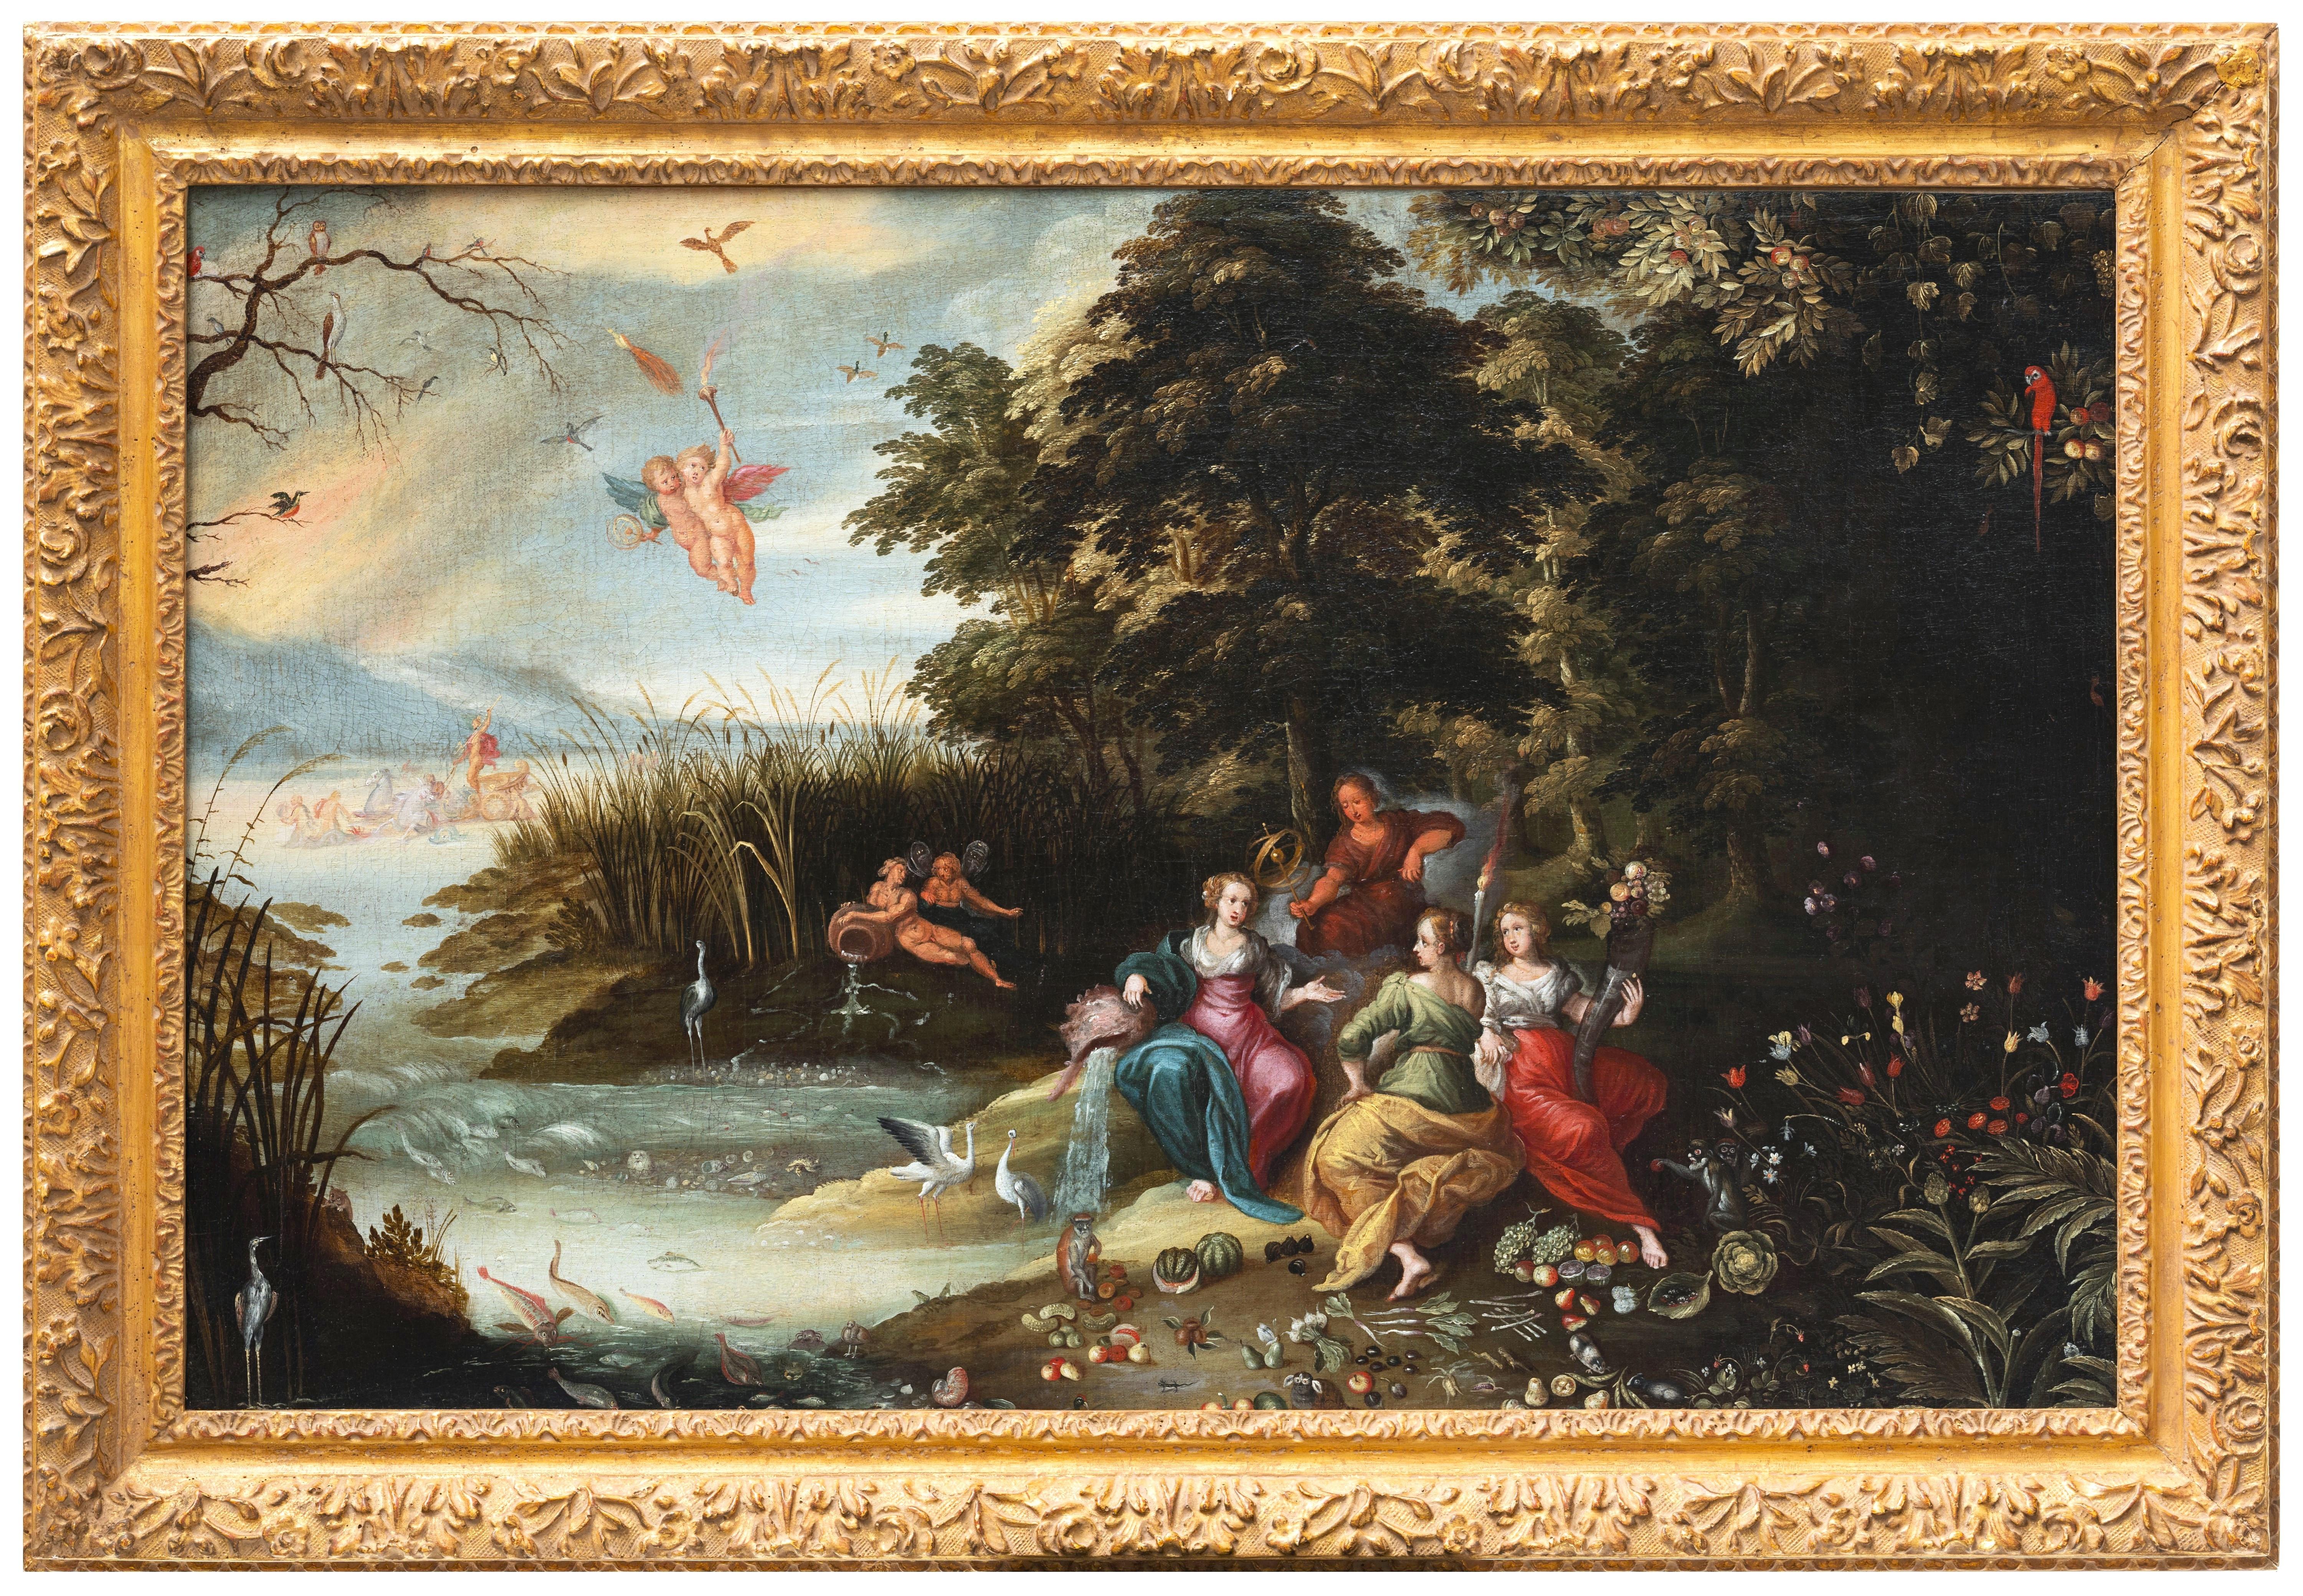 17th century Antwerp school
Landscape, animals and stilllife by a pupil of Jan Brueghel the Younger (1601-1678)
Figures by a pupil of Frans Francken II
Oil on canvas: h. 52,5 cm, w. 82 cm (11
Giltwood frame
Framed: h. 66 cm, w. 96 cm
Our magnificent